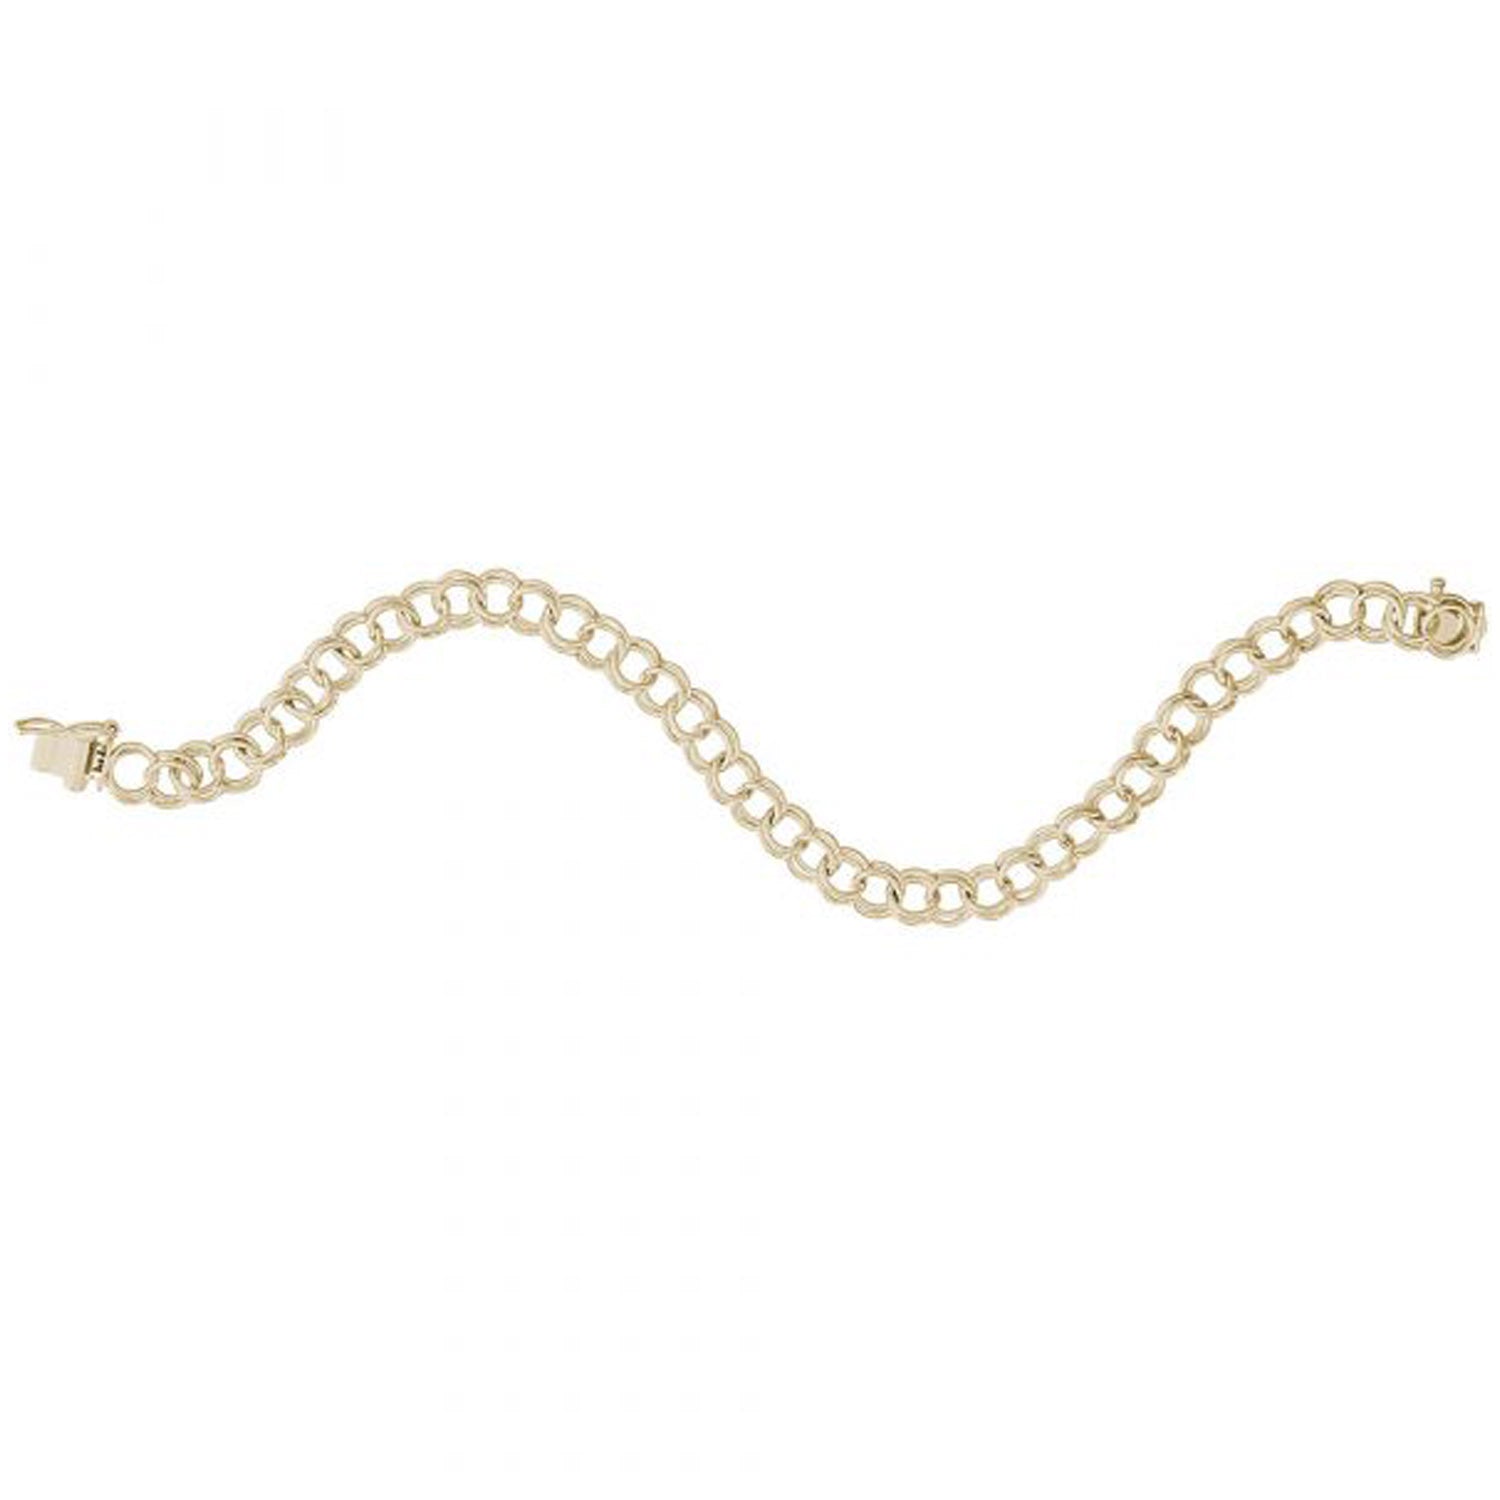 Double Curb Link Charm Bracelet in 10kt Yellow Gold (7 inches)